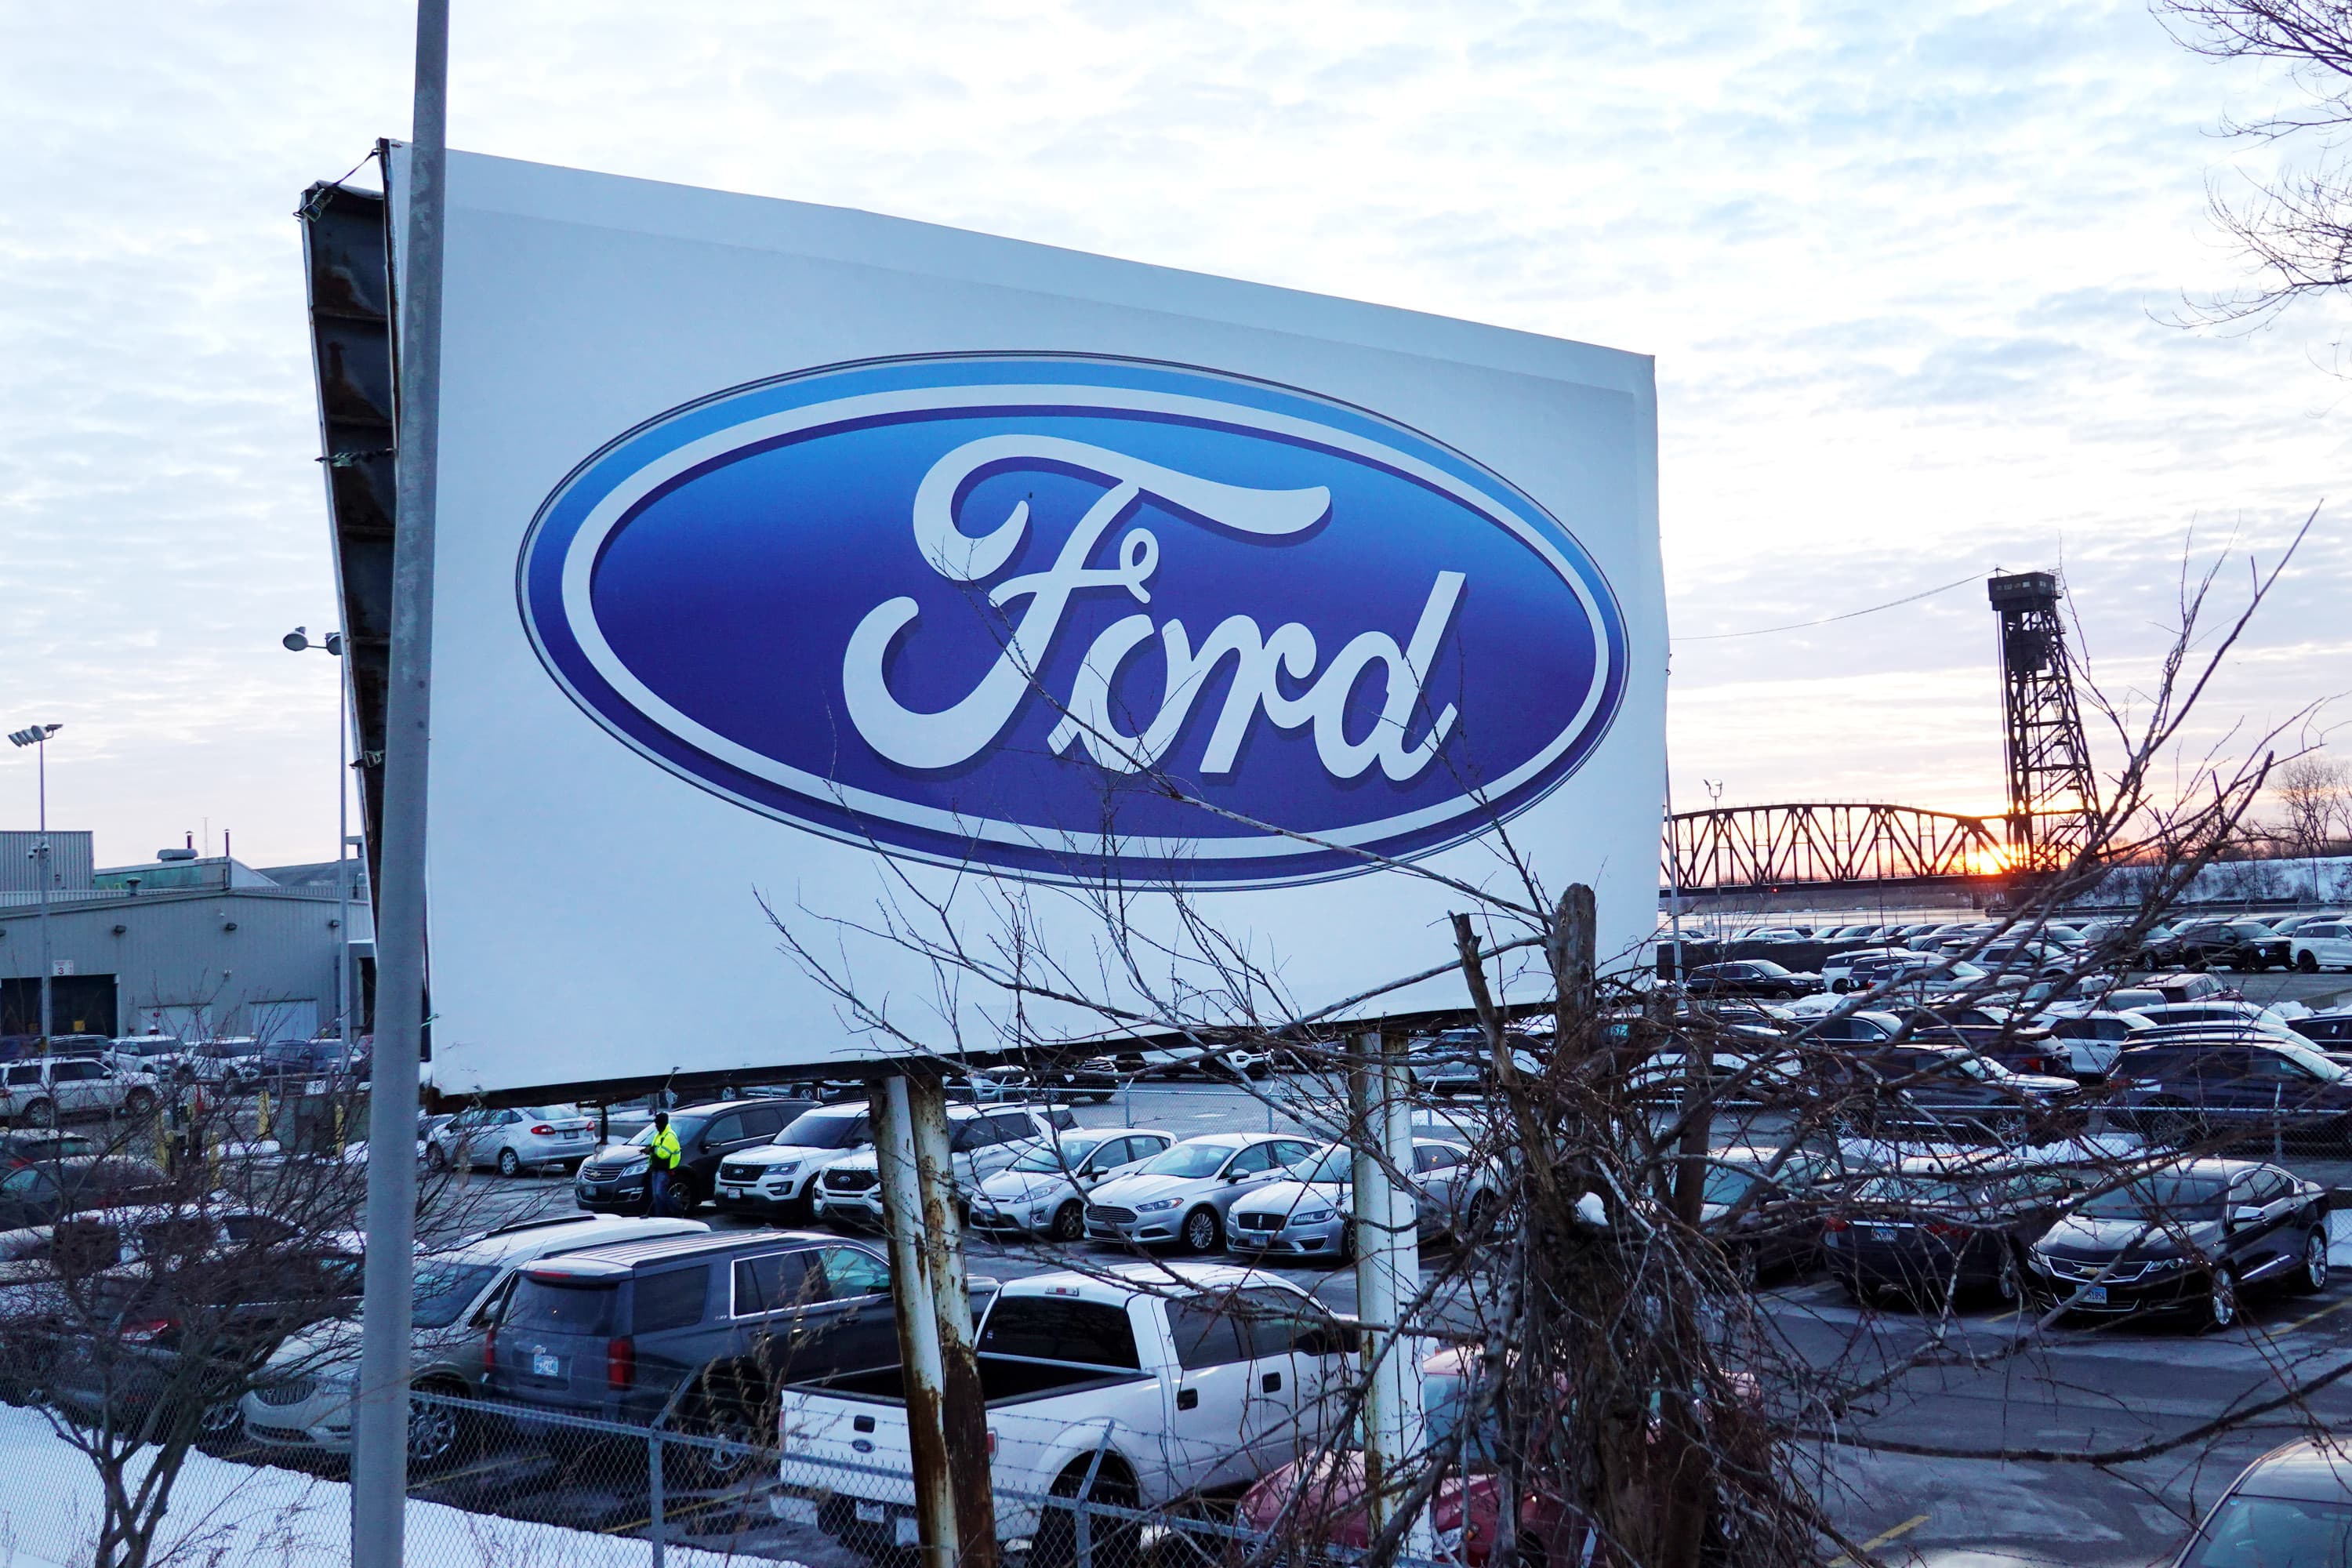 Jim Cramer backs Ford to outperform recovery favorites